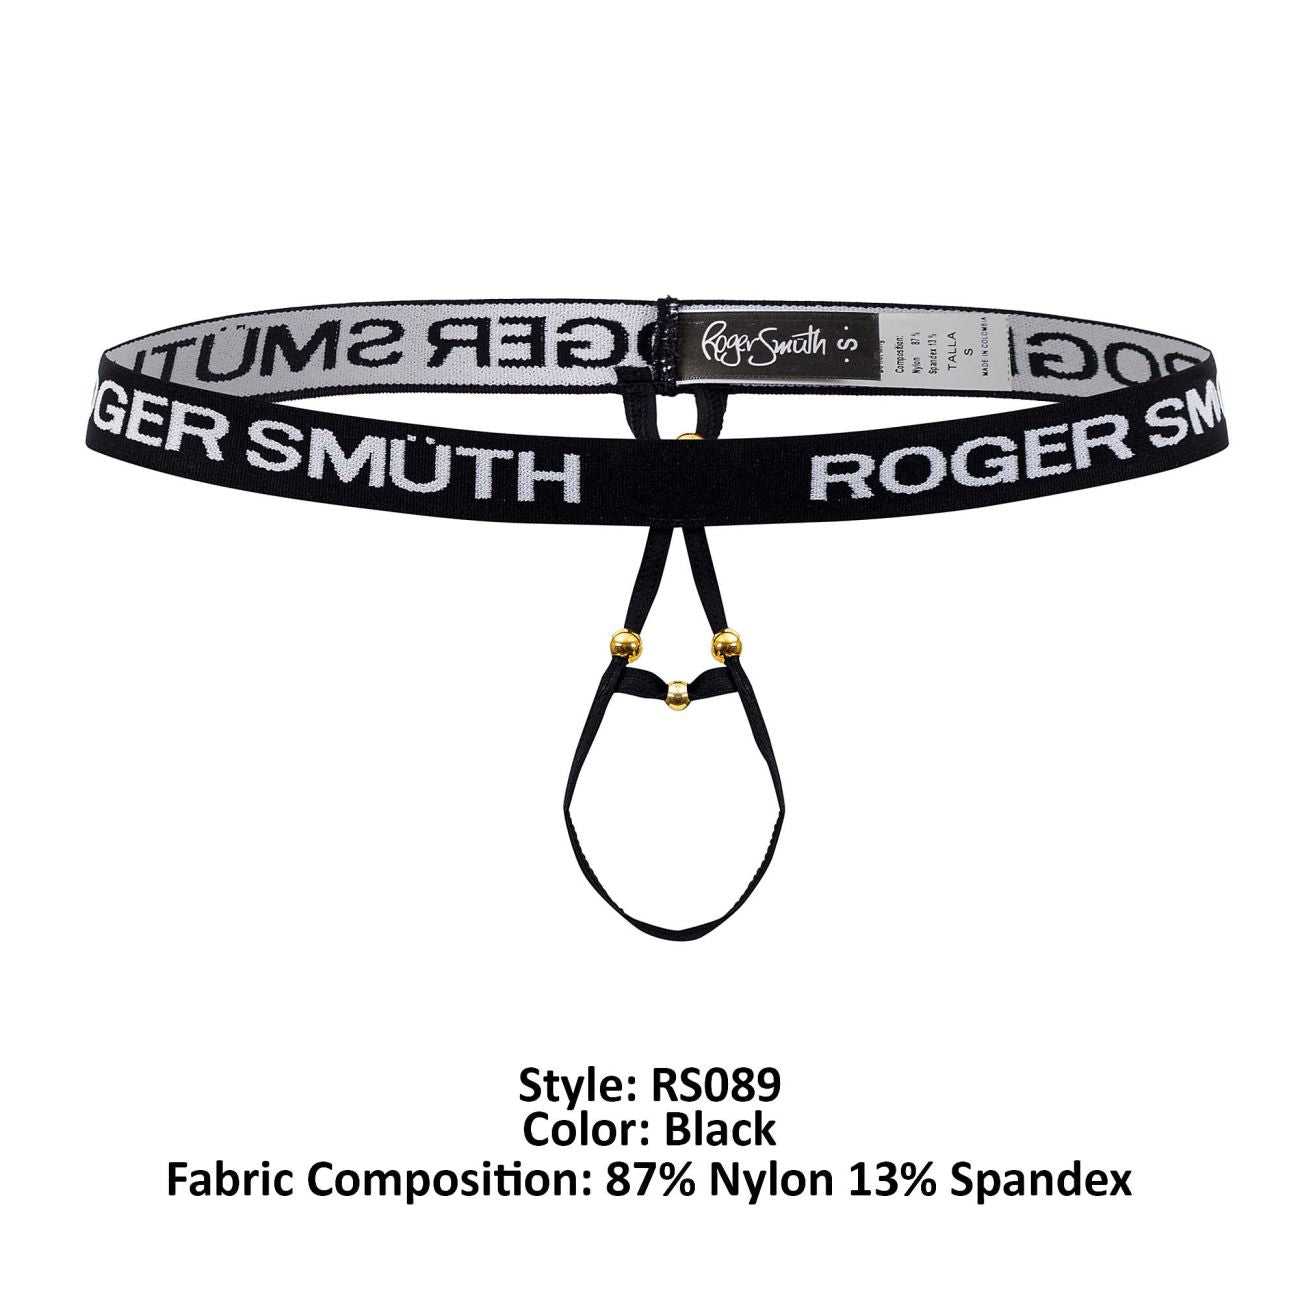 Roger Smuth RS089 Ball Lifter Black